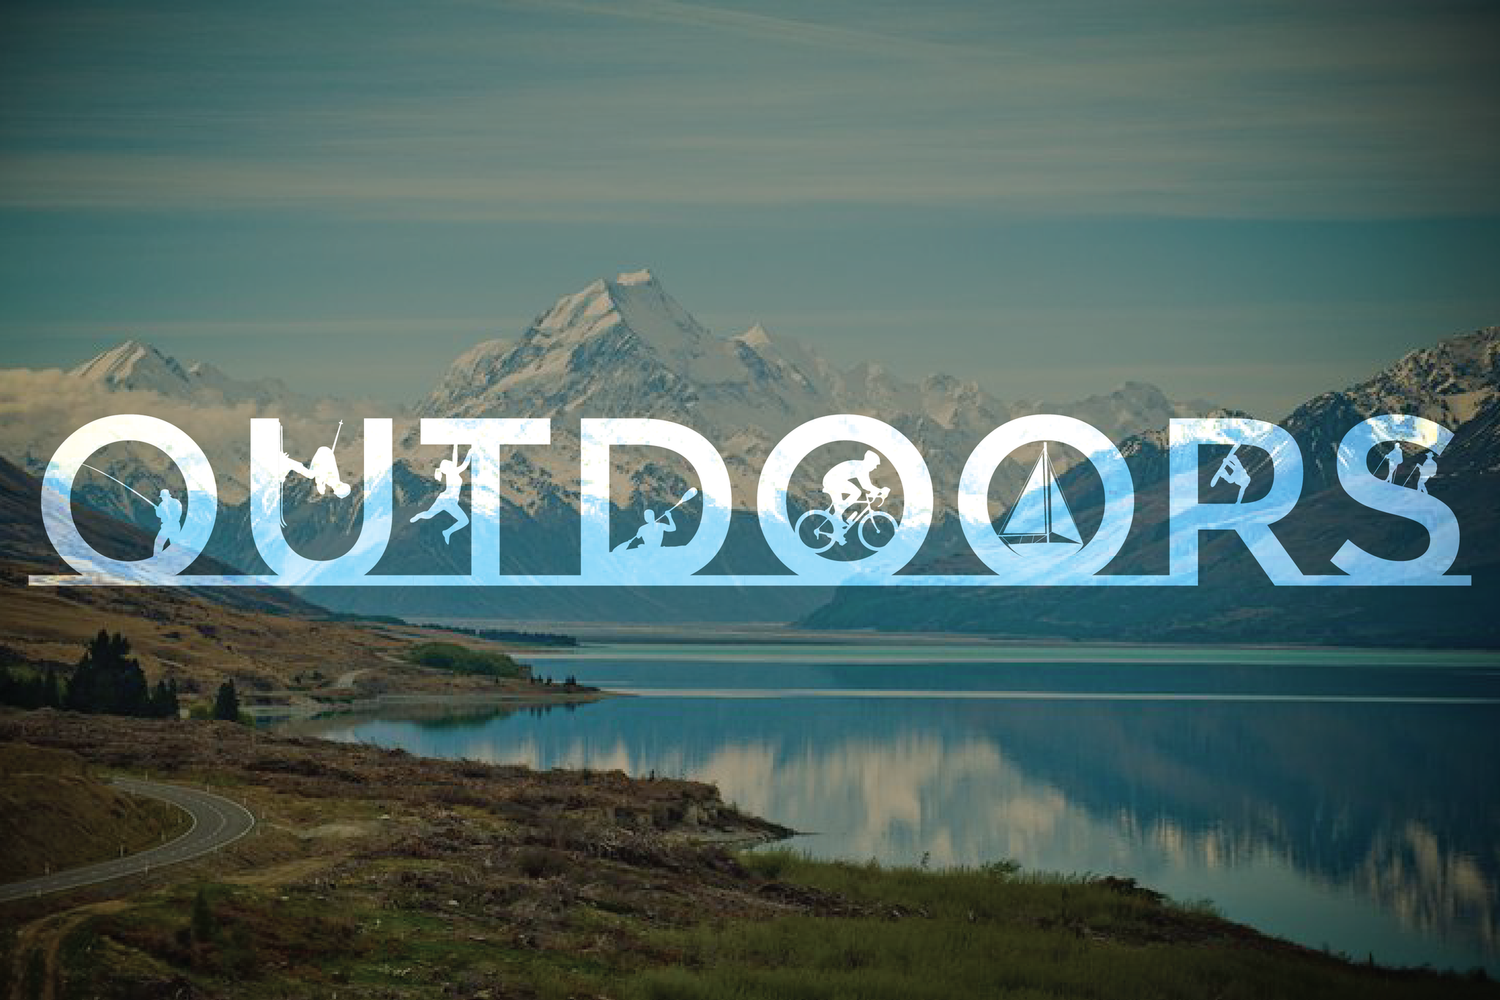 Introducing the Swaponz Blog Page: Outdoors